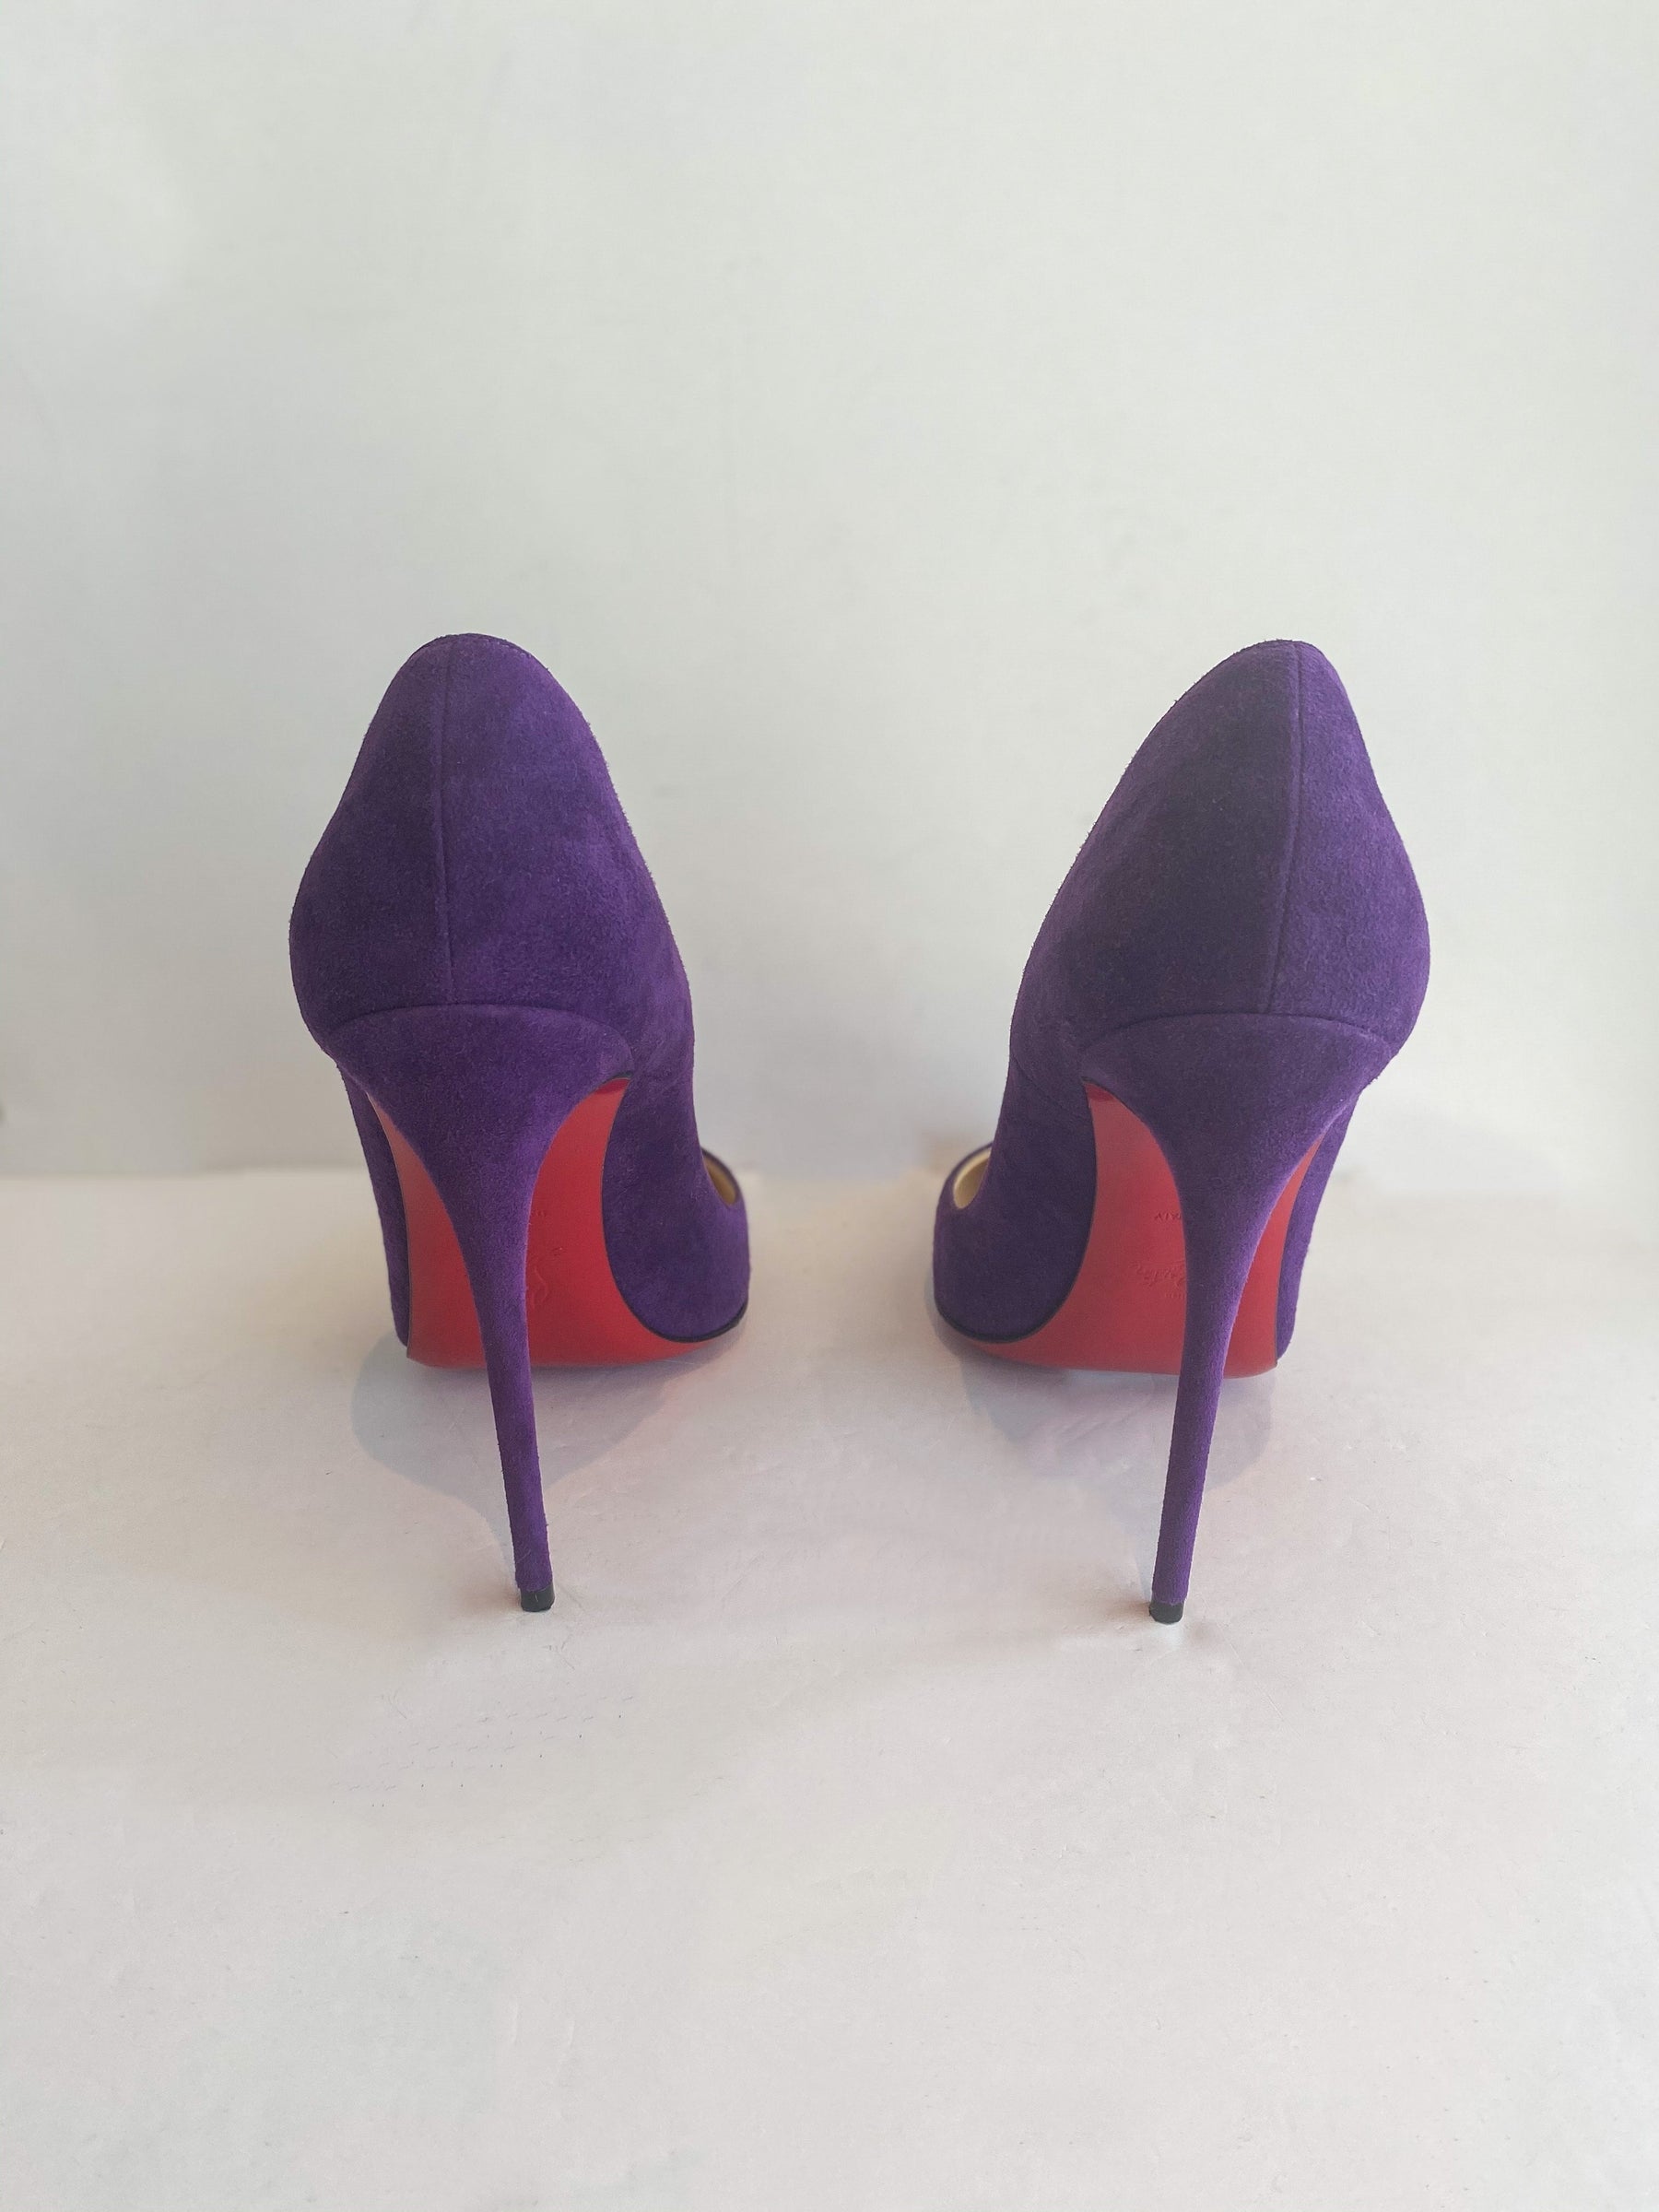 Christian Louboutin So Kate Suede Heels Violet Purple Side of Shoes